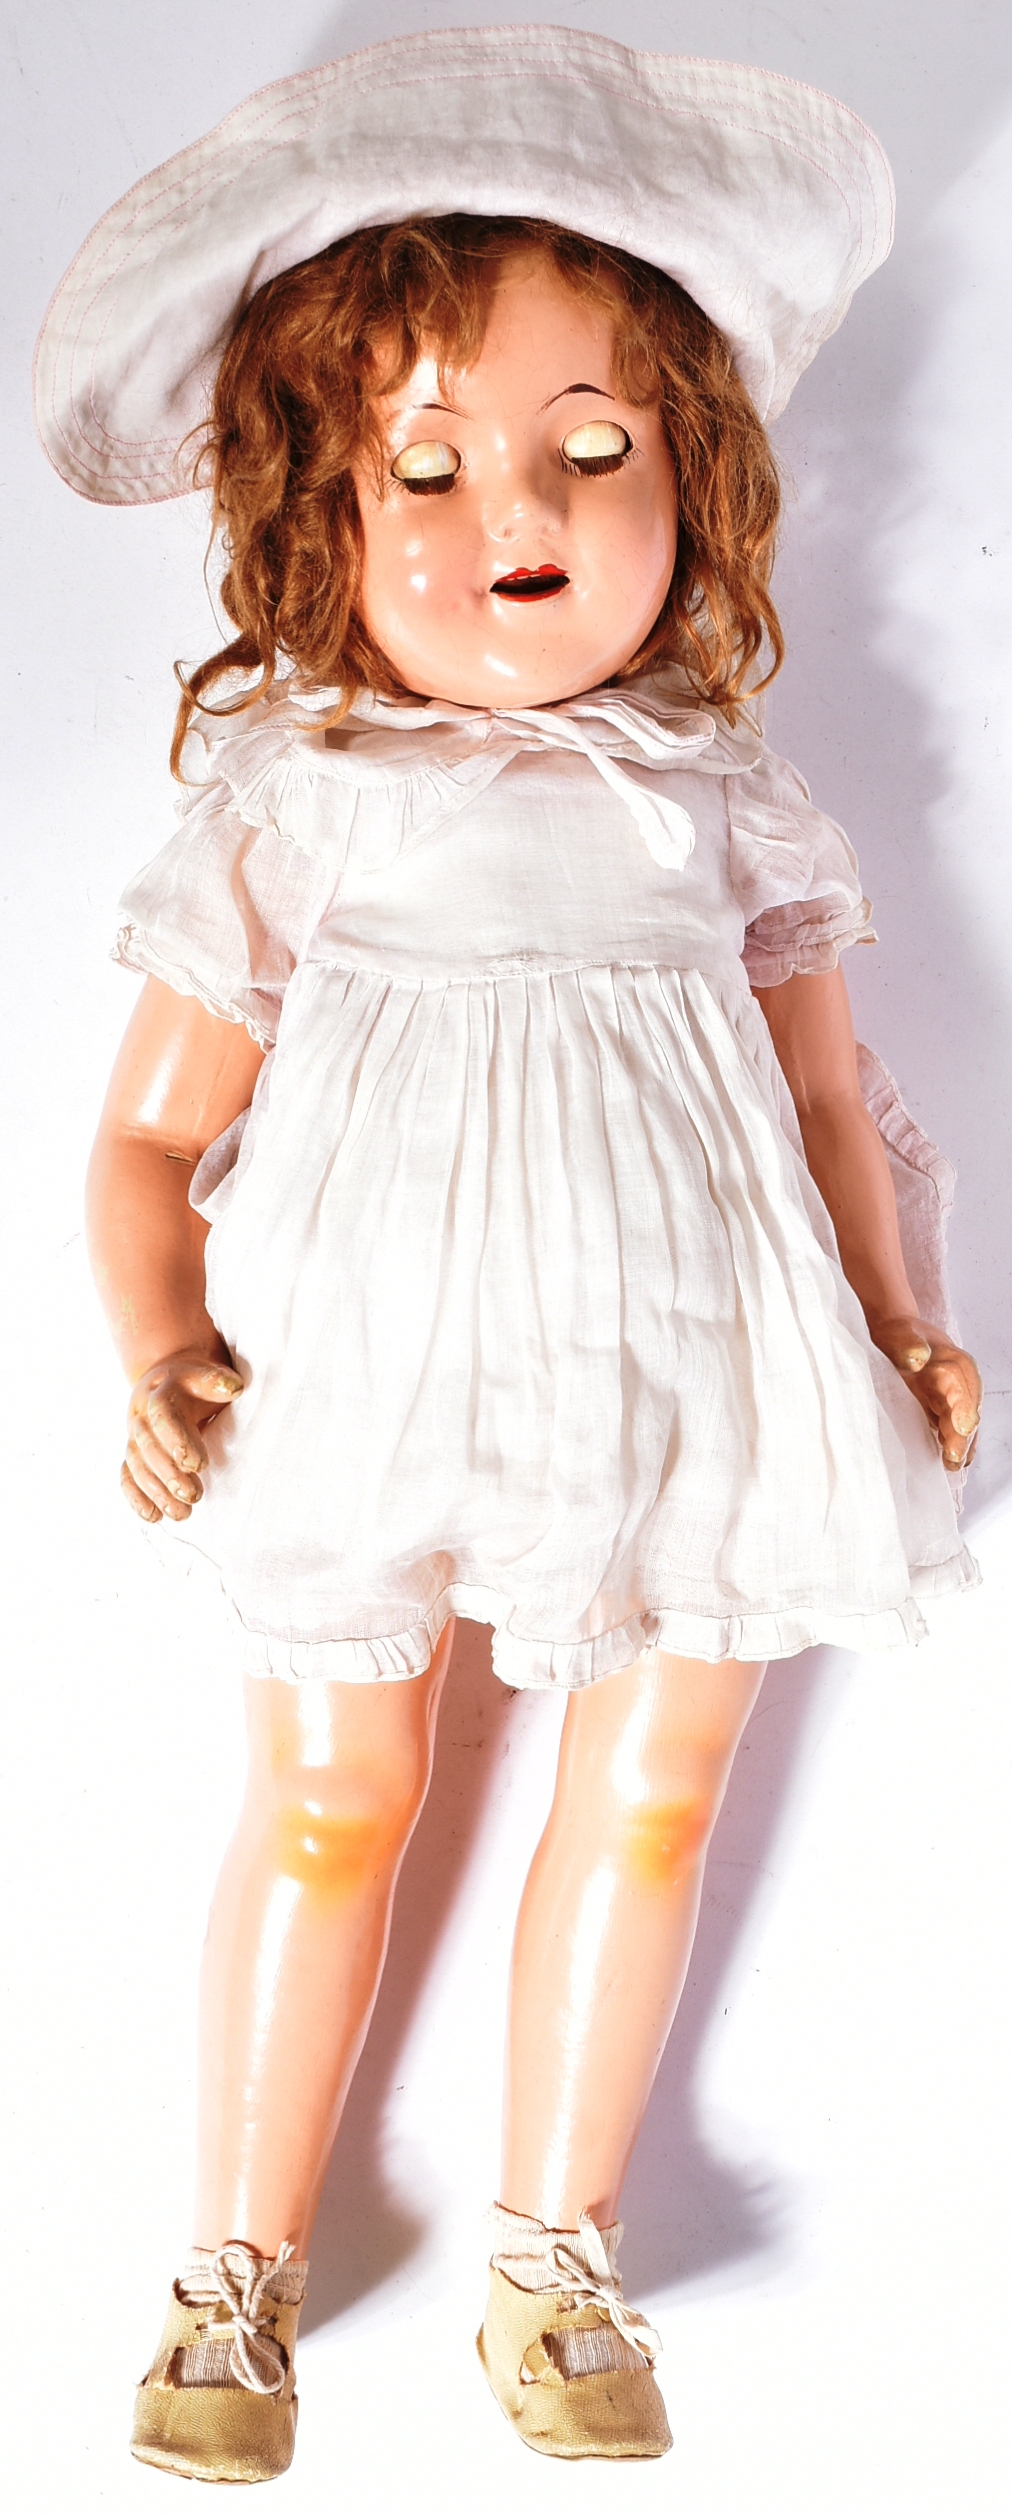 VINTAGE CANADIAN RELIABLE SHIRLEY TEMPLE DOLL - Image 3 of 5